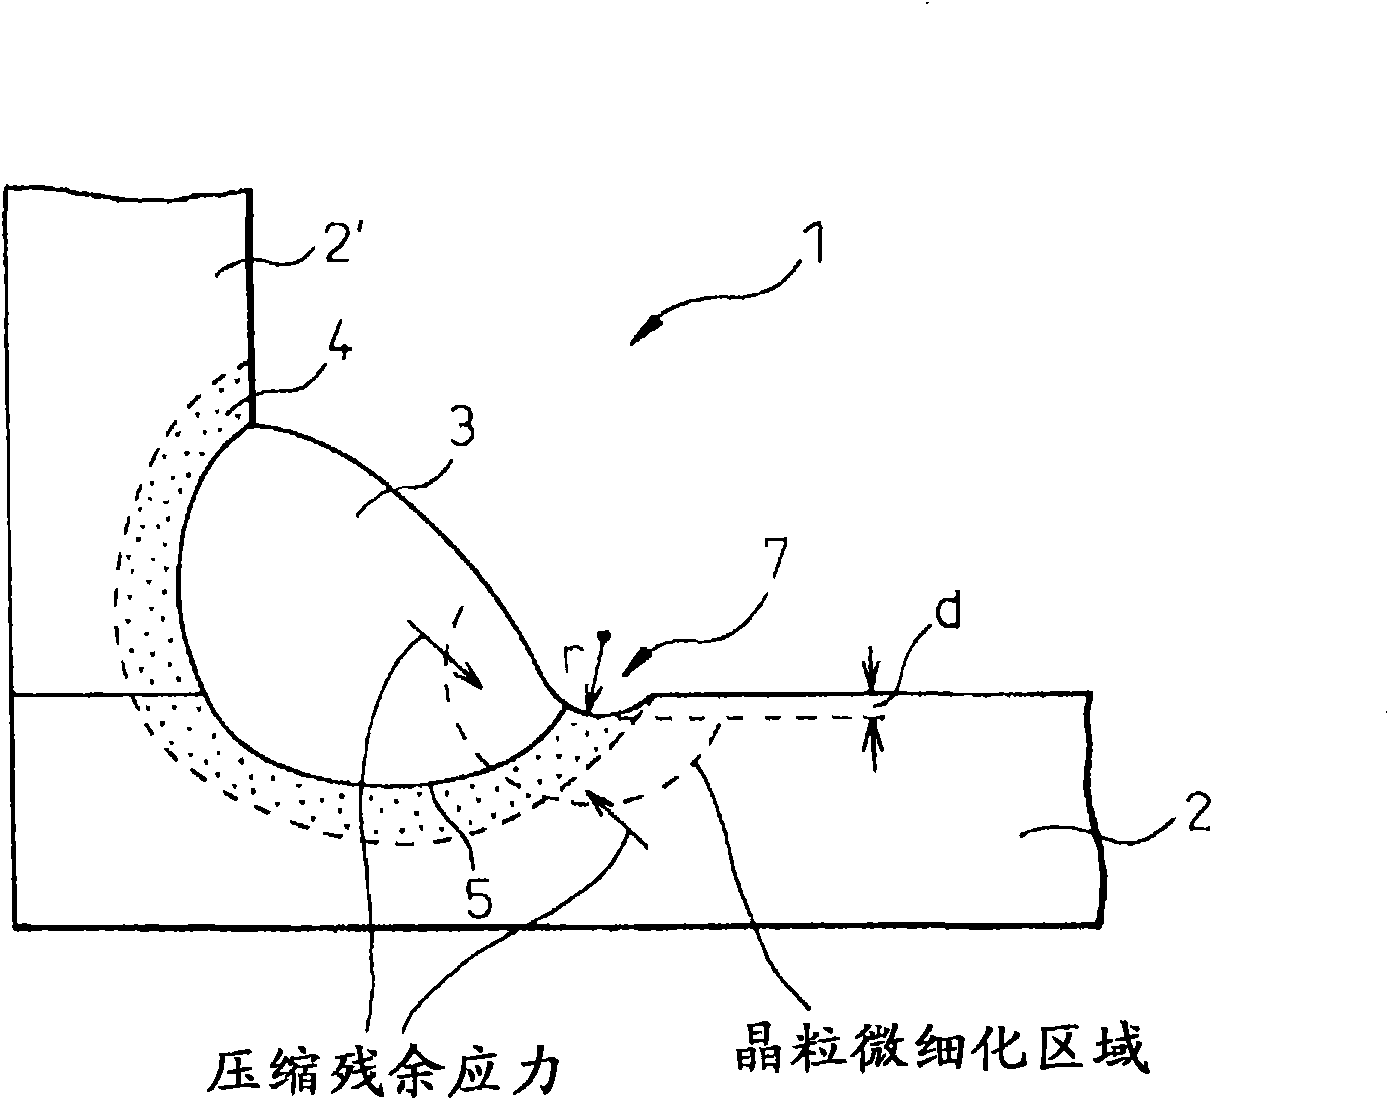 Welded joint with excellent fatigue-resistance characteristics, and method for producing same